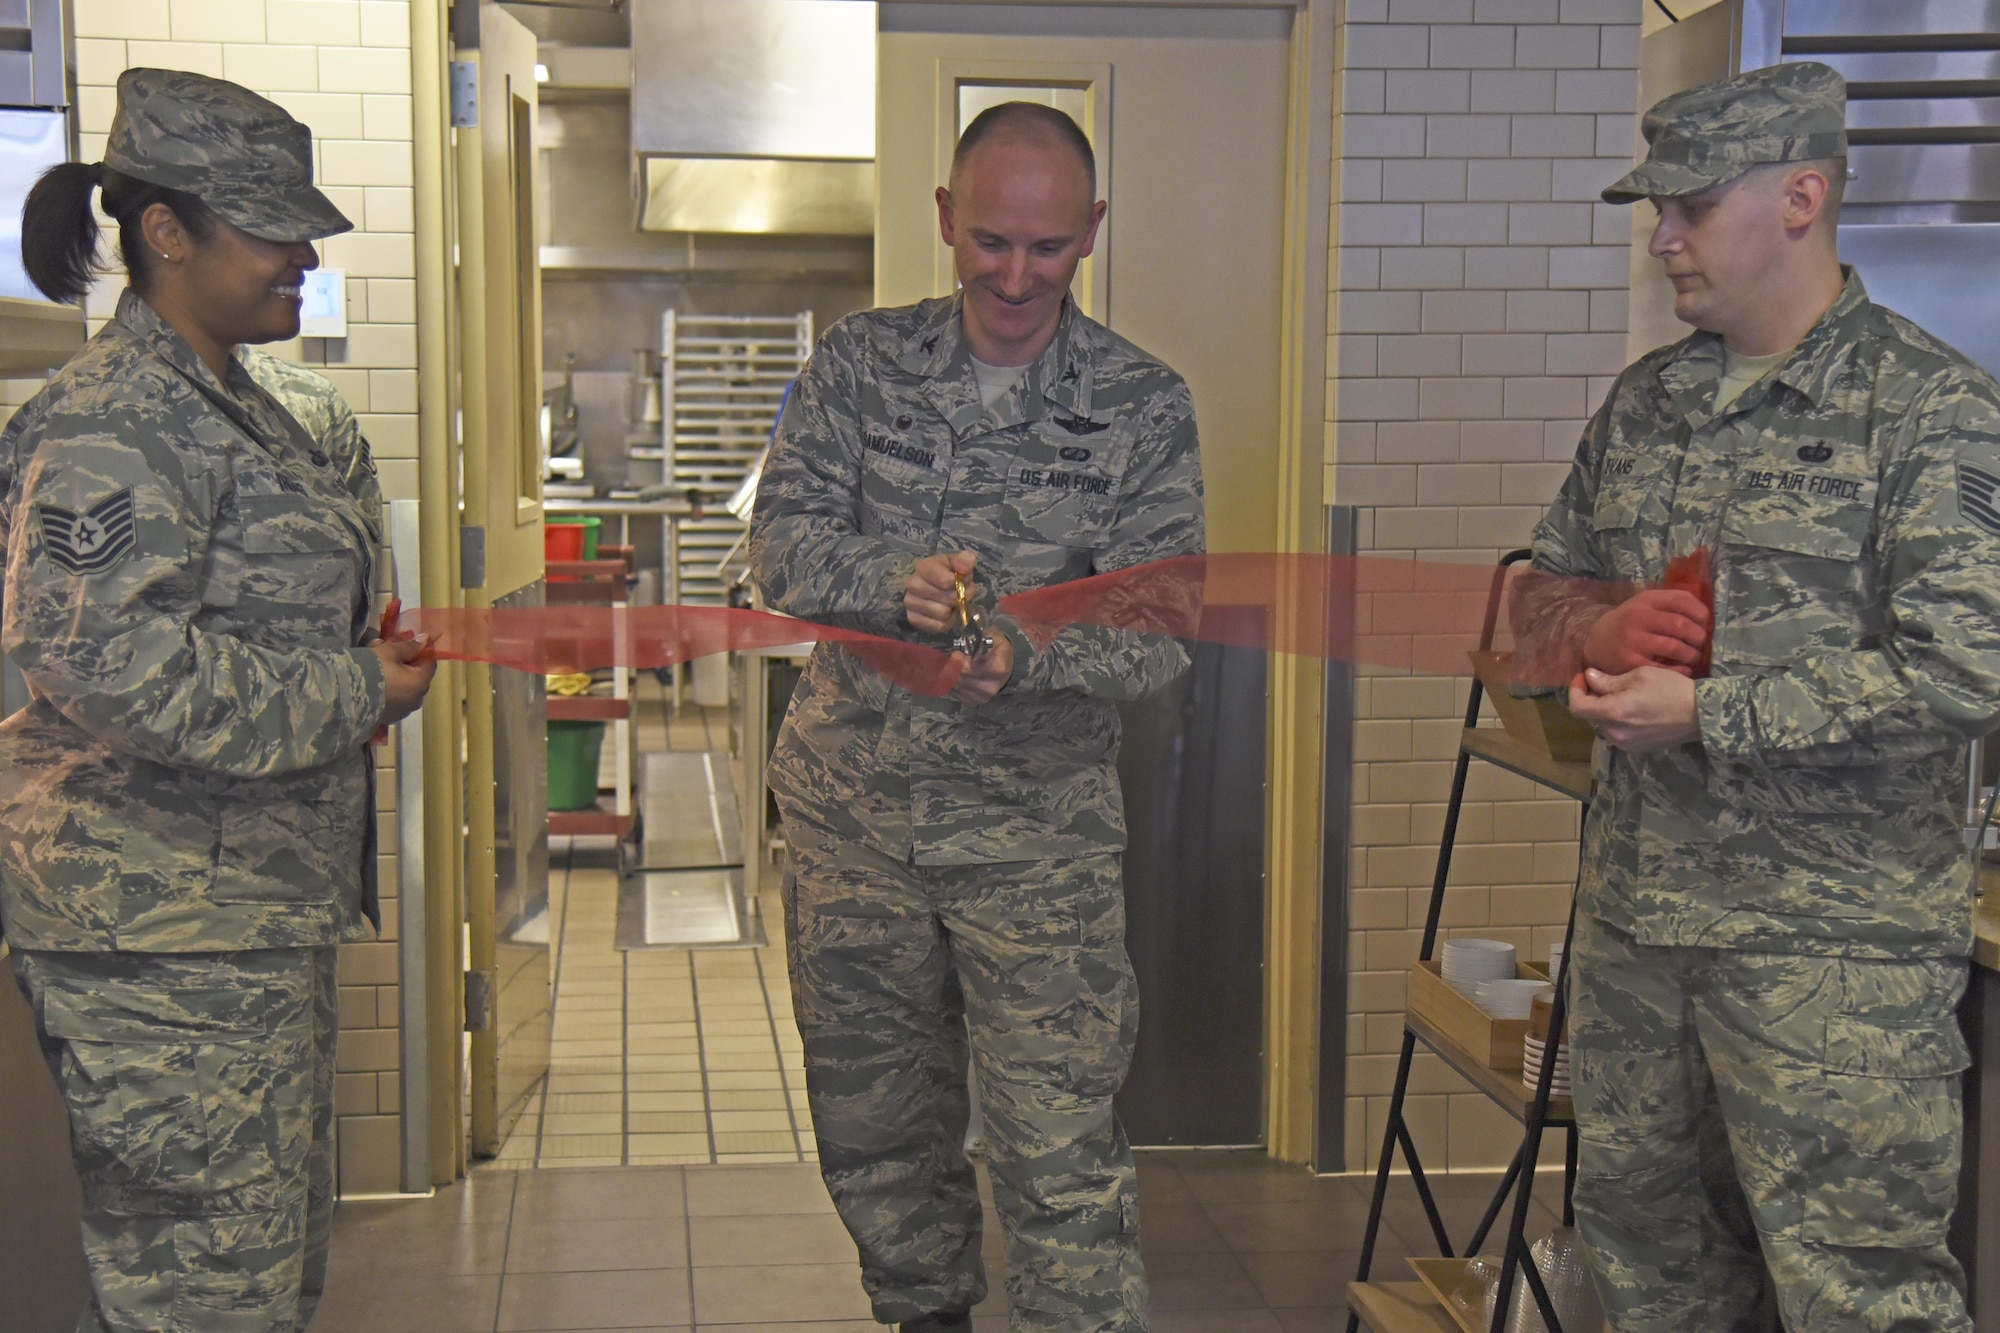 Col. Ryan Samuelson, 92nd Air Refueling Wing commander, cuts the ribbon during the Warrior Mission Essential Feeding Facility new concept launch Mar. 27, 2017, at Fairchild Air Force Base, Washington. The new concepts are an expansion on the standard Food Transformation Initiative operation, making Fairchild the third base in the Air Force to incorporate the healthier and cost saving Super Sonic Subs, CIAO Pizza and Big City Grill. (U.S. Air Force photo/Senior Airman Mackenzie Richardson)